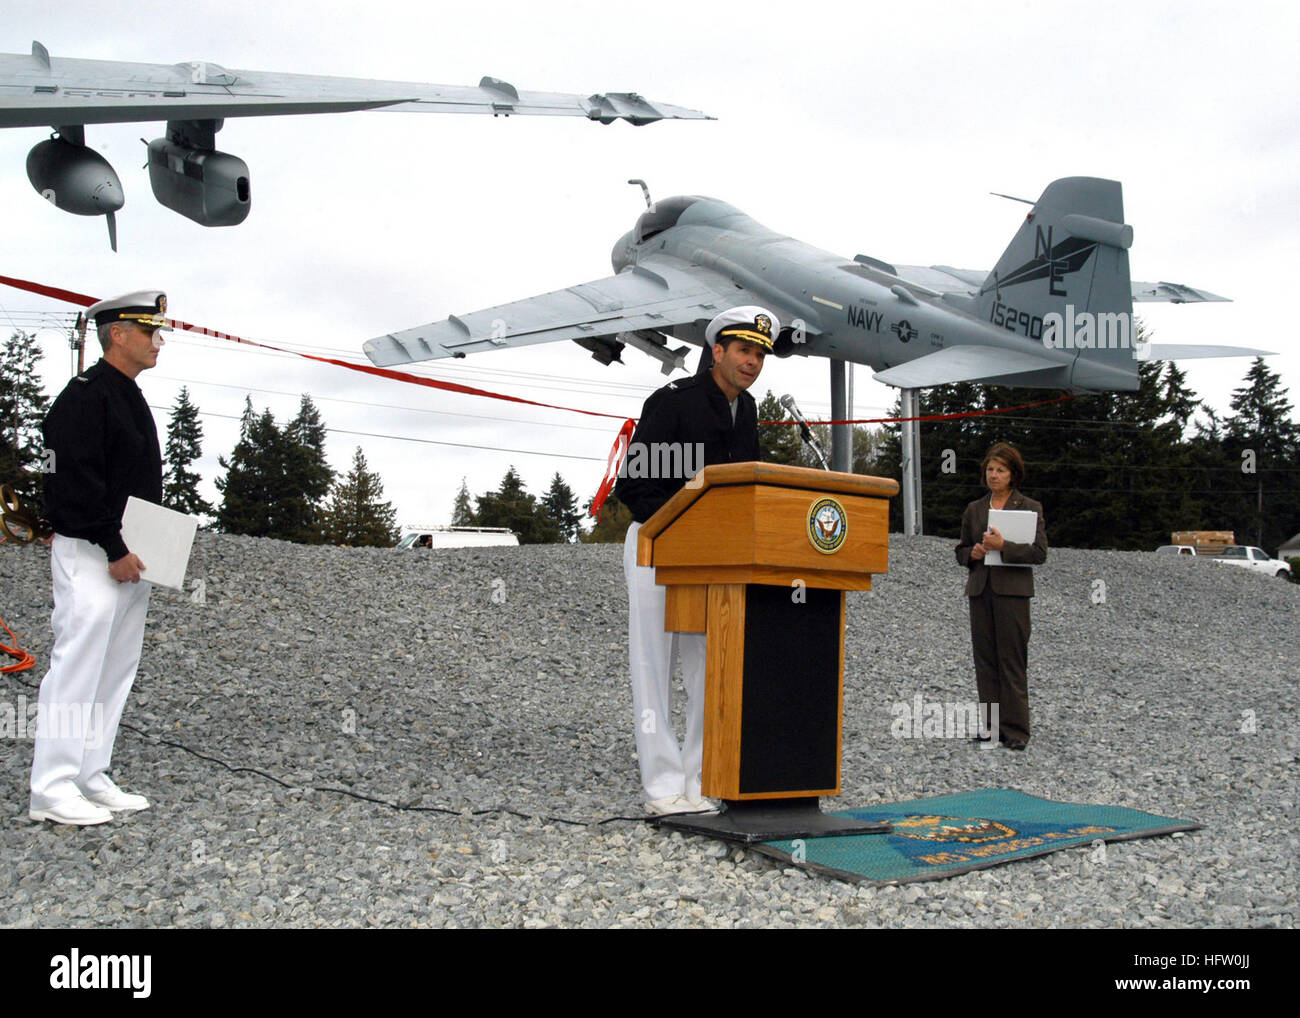 070920-N-9860Y-003 OAK HARBOR, Wash. (Sept. 20, 2007) - Capt. Thomas Tack, commodore of Electronic Attack Wing Pacific, speaks at the ribbon-cutting ceremony for the Naval Air Station (NAS) Whidbey Island Gateway under an A-6 Intruder and EA-6B Prowler display. Oak Harbor Mayor Patty Cohen and Capt. Gerral K. David, commanding officer of NAS Whidbey Island, were also in attendance. The Gateway was a joint venture by the local Oak Harbor community and NAS Whidbey Island to commemorate the bond between the two communities. U.S. Navy photo by Mass Communication Specialist 2nd Class Tucker M. Yate Stock Photo